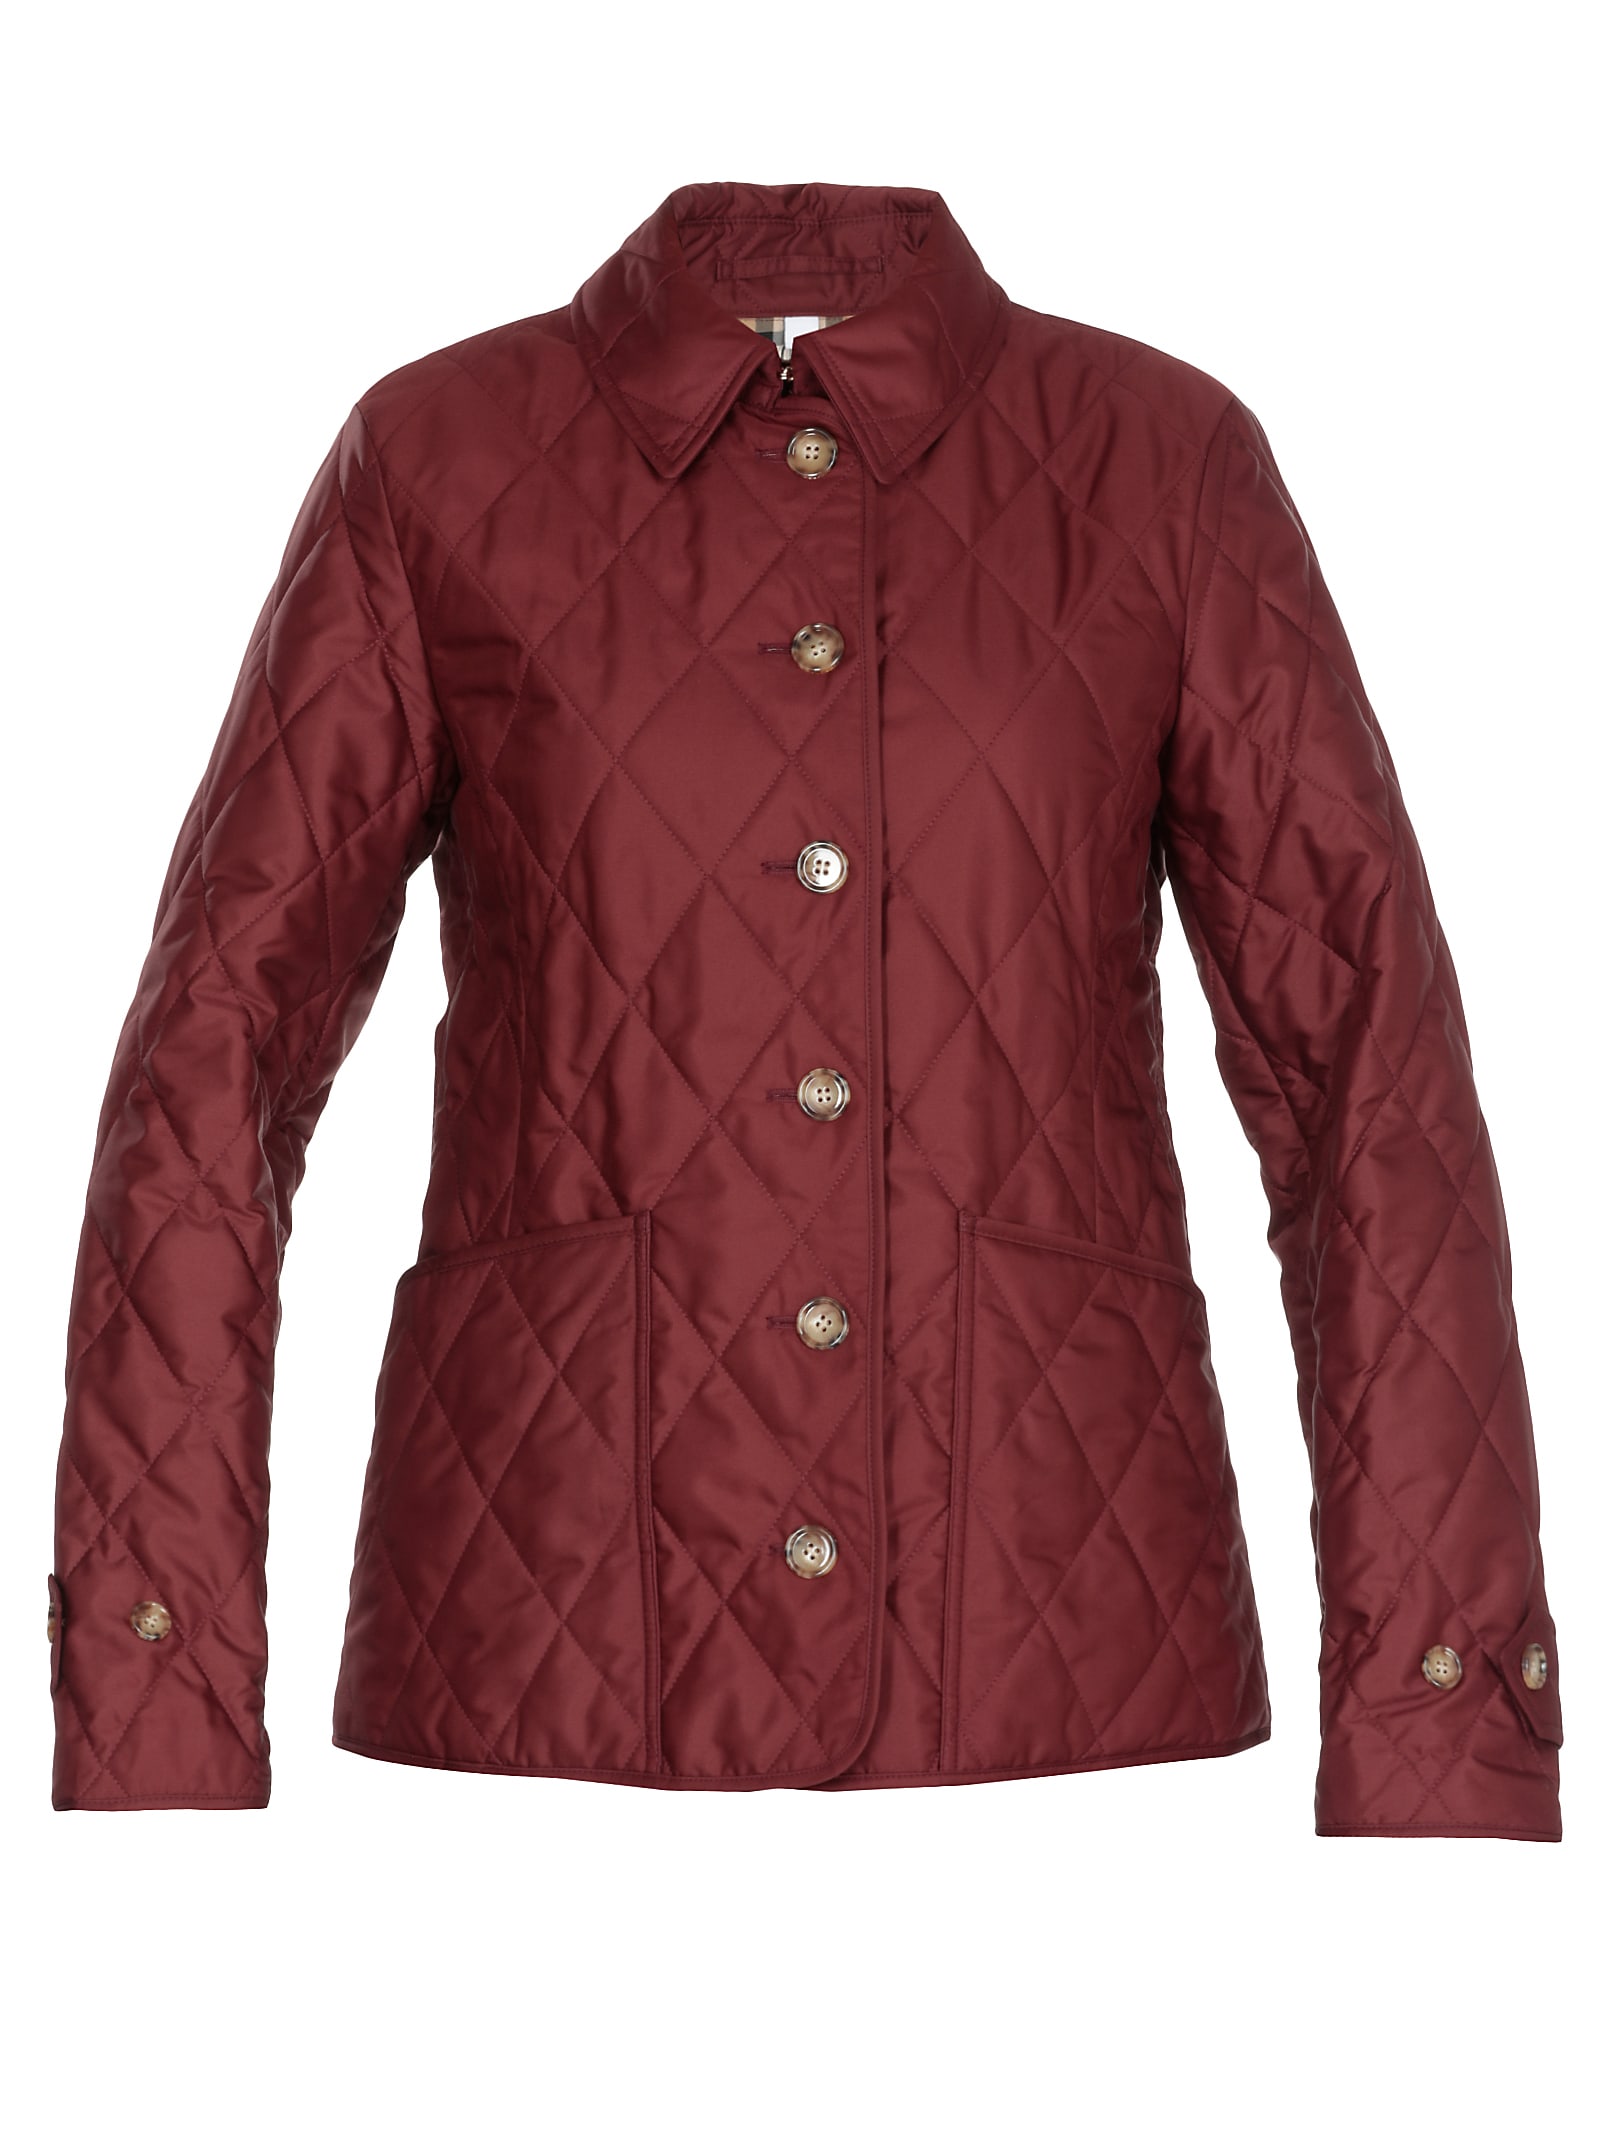 BURBERRY FERNLEIGH DIAMOND-QUILTED JACKET,11234119